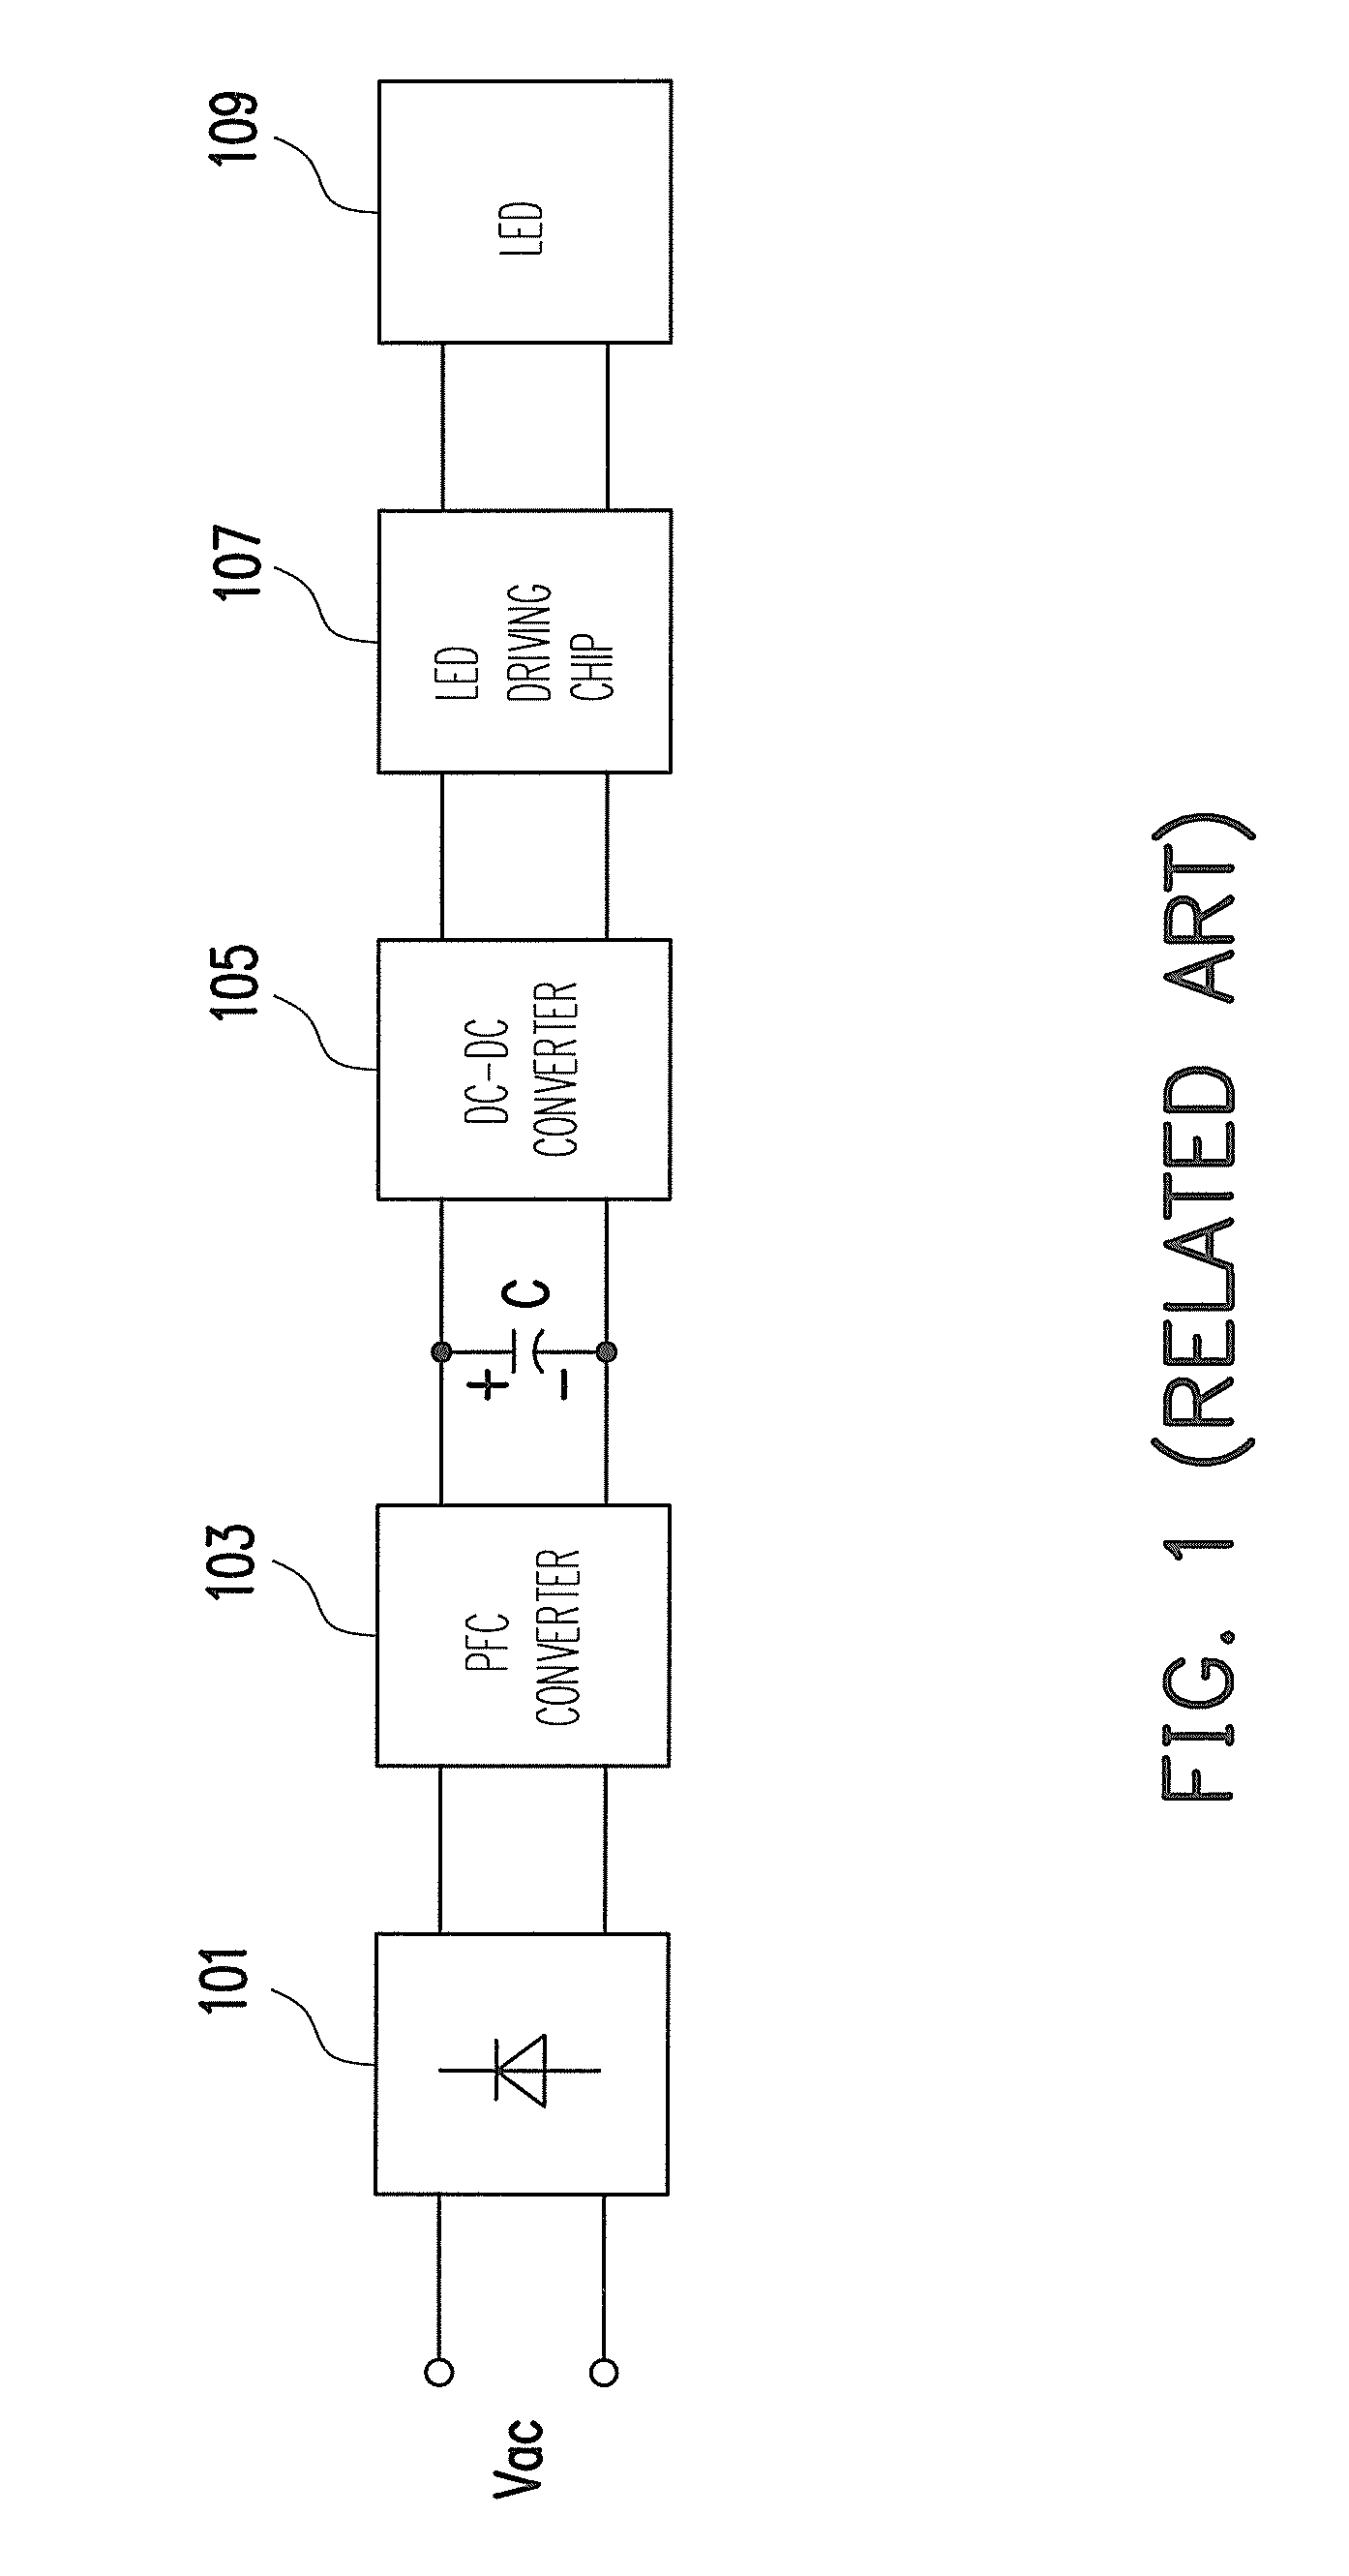 Driving apparatus for light emitting diodes